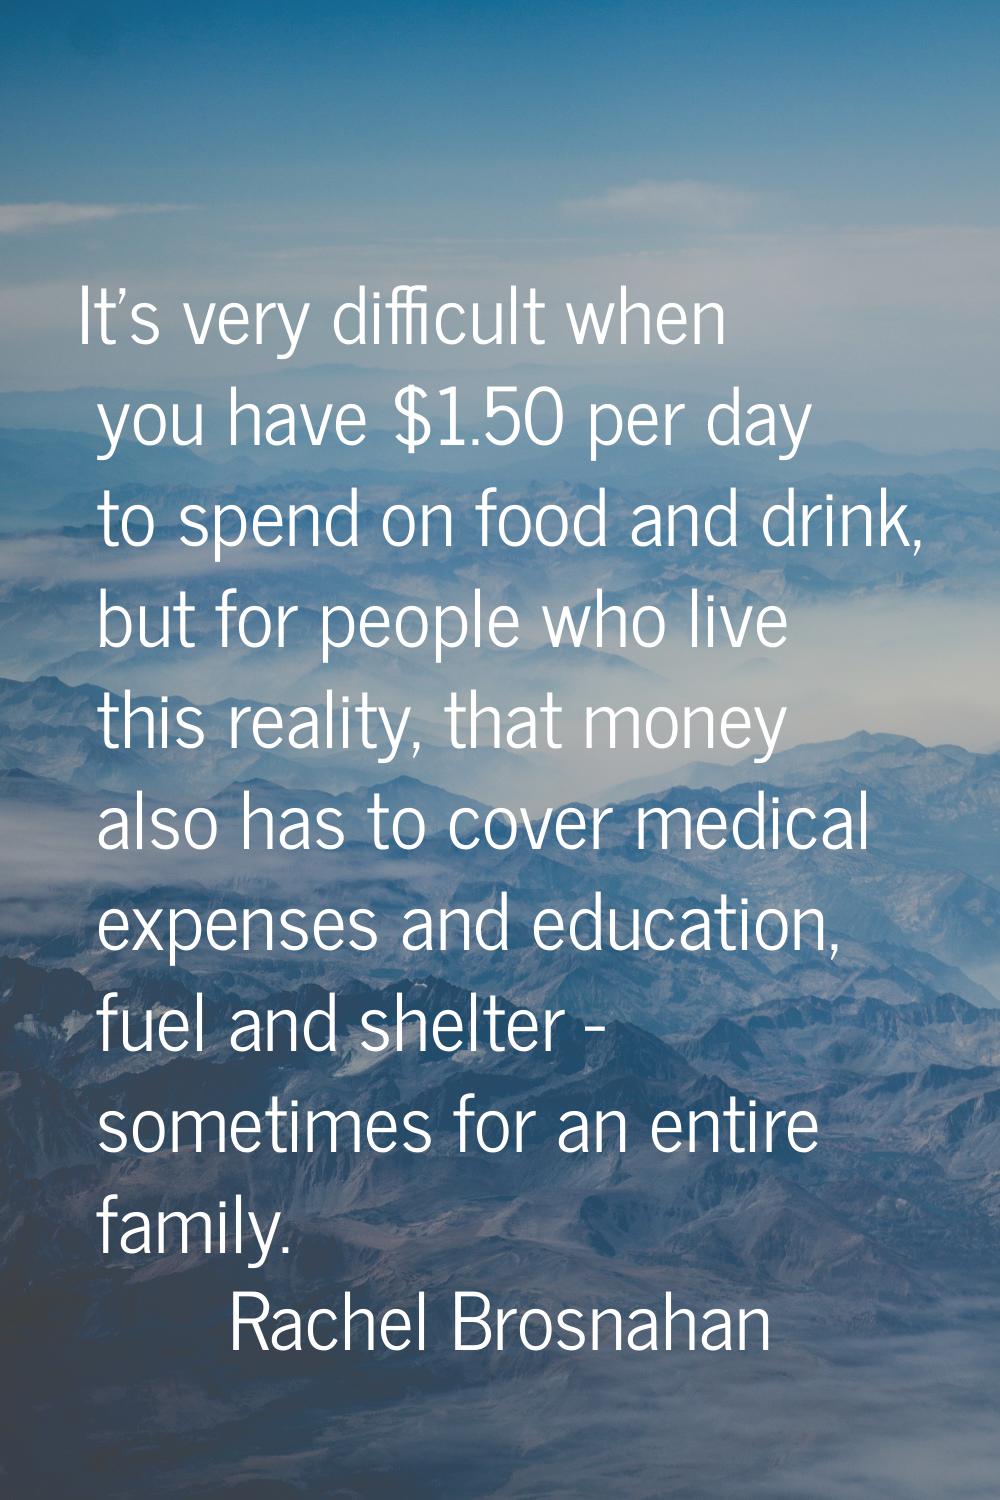 It's very difficult when you have $1.50 per day to spend on food and drink, but for people who live